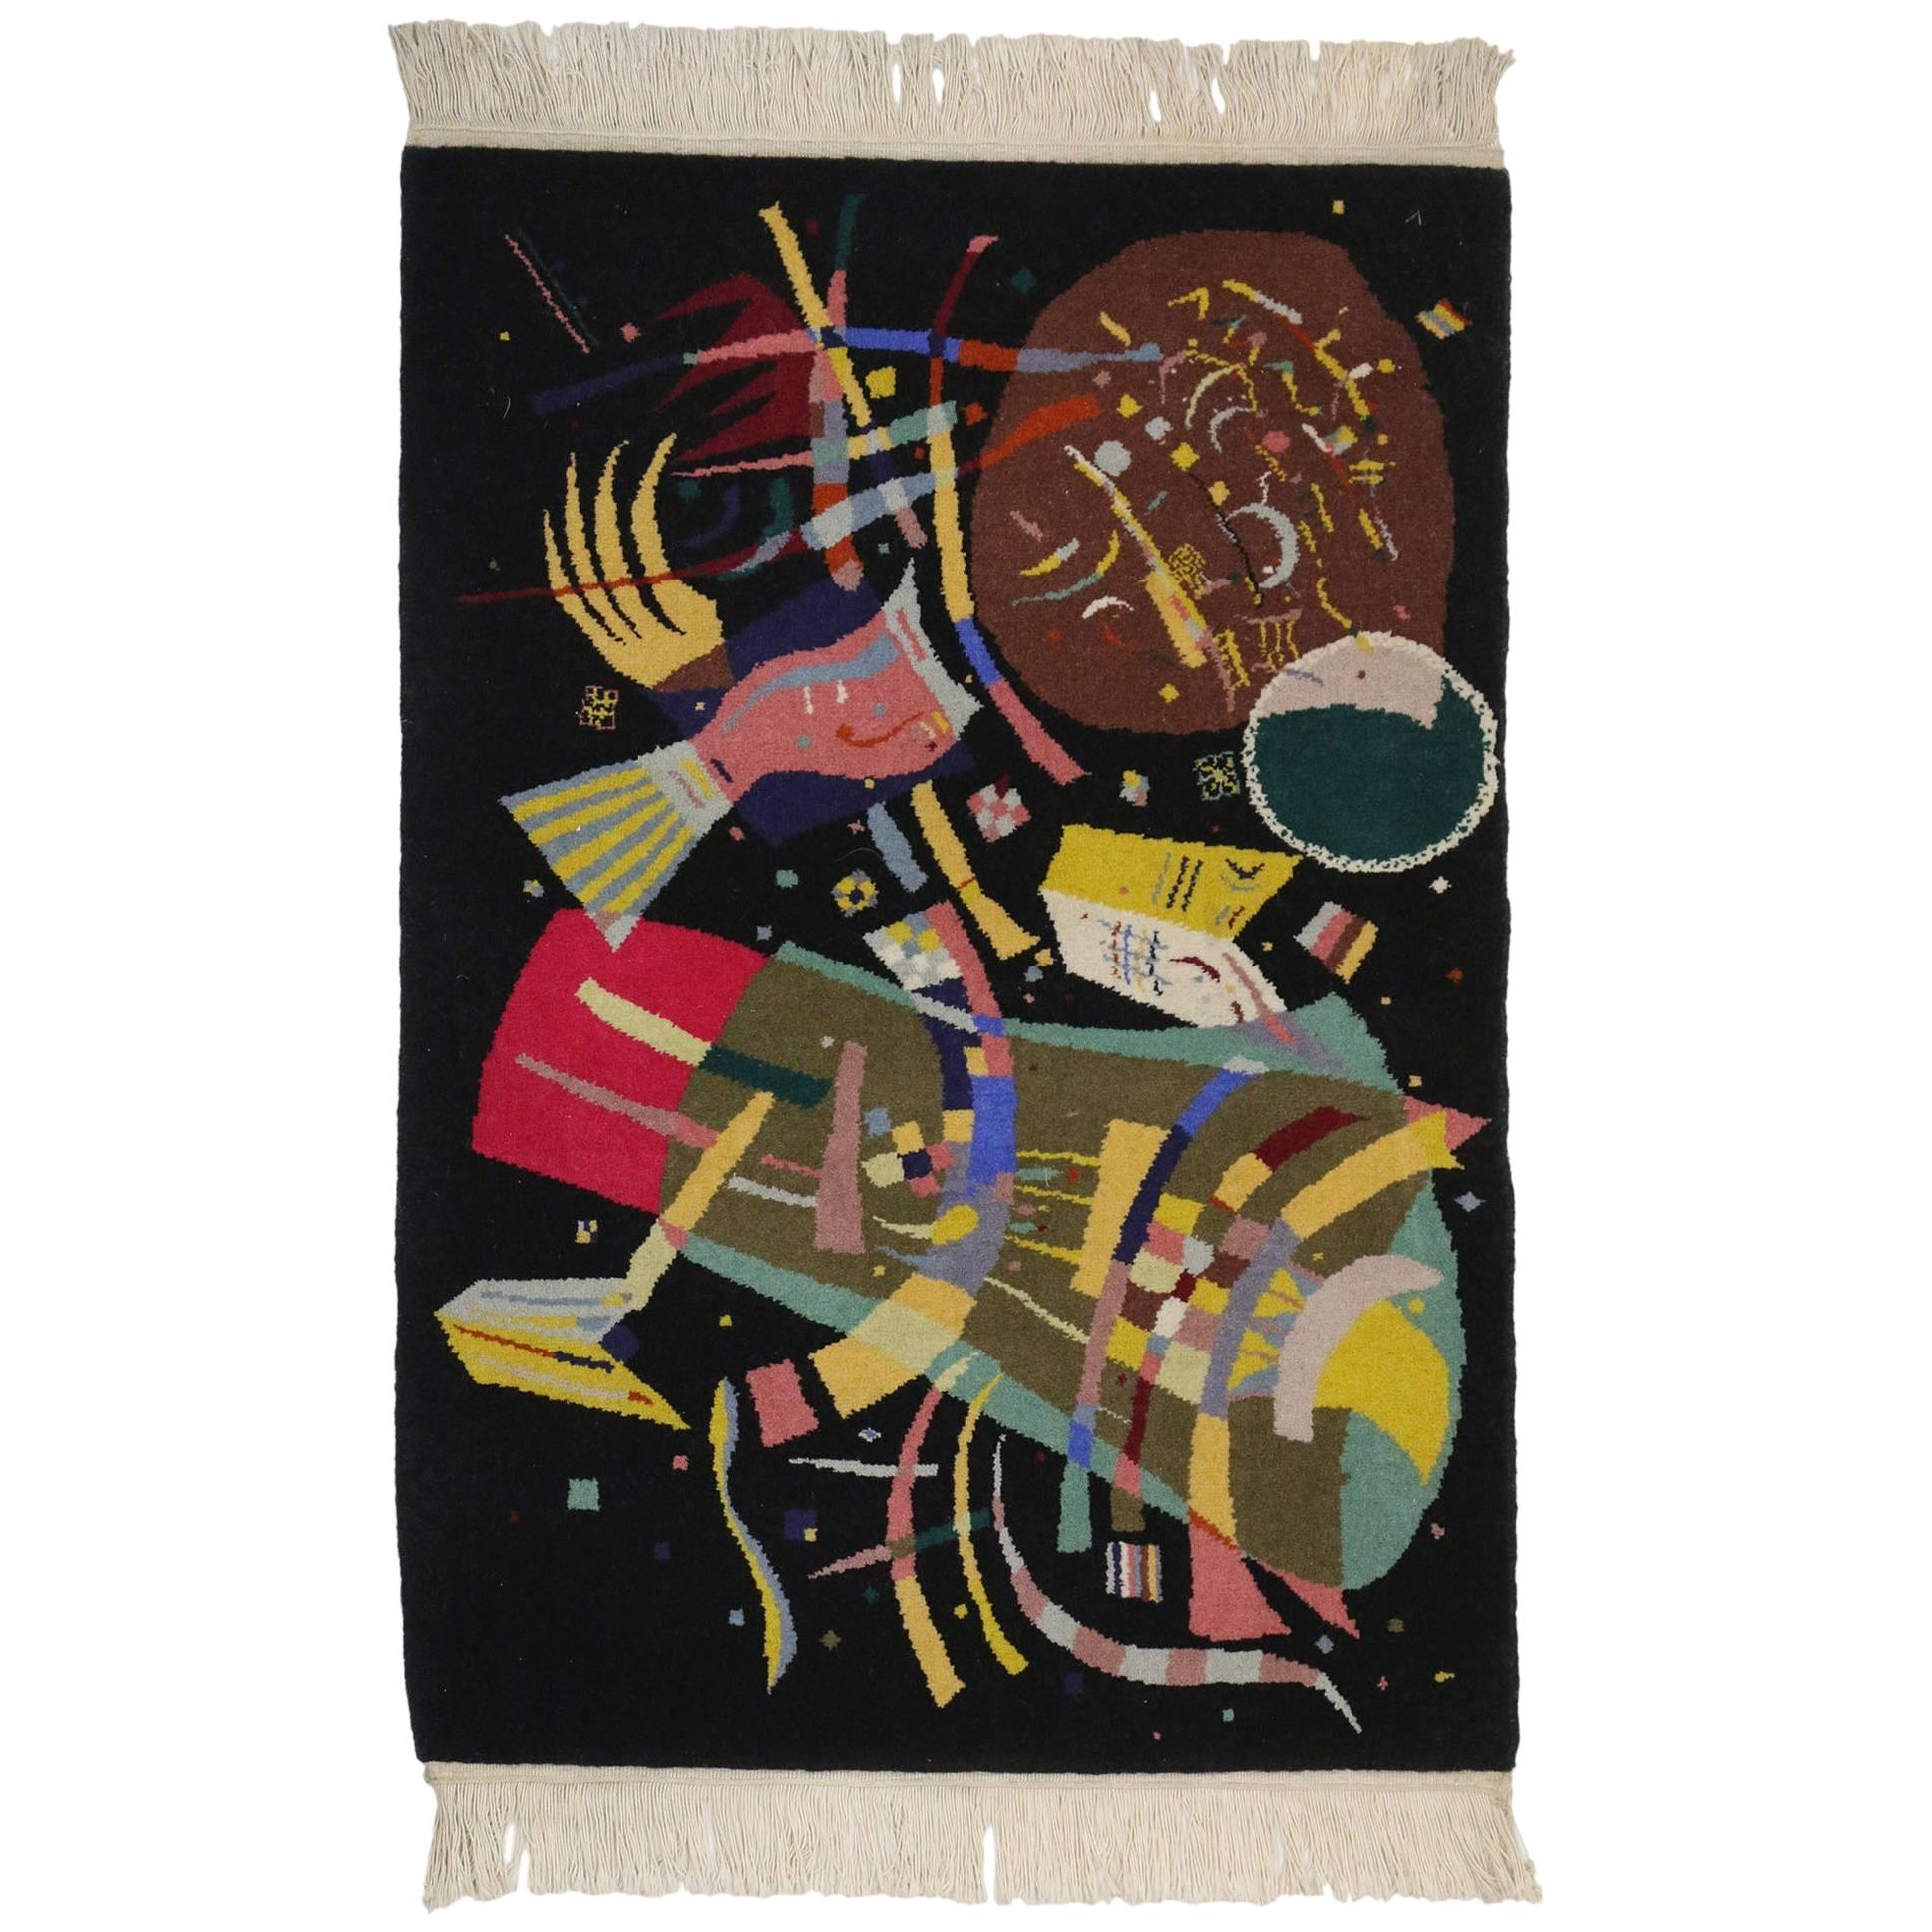 Contemporary Abstract Tapestry Inspired by Wassily Kandinsky's "Composition X"